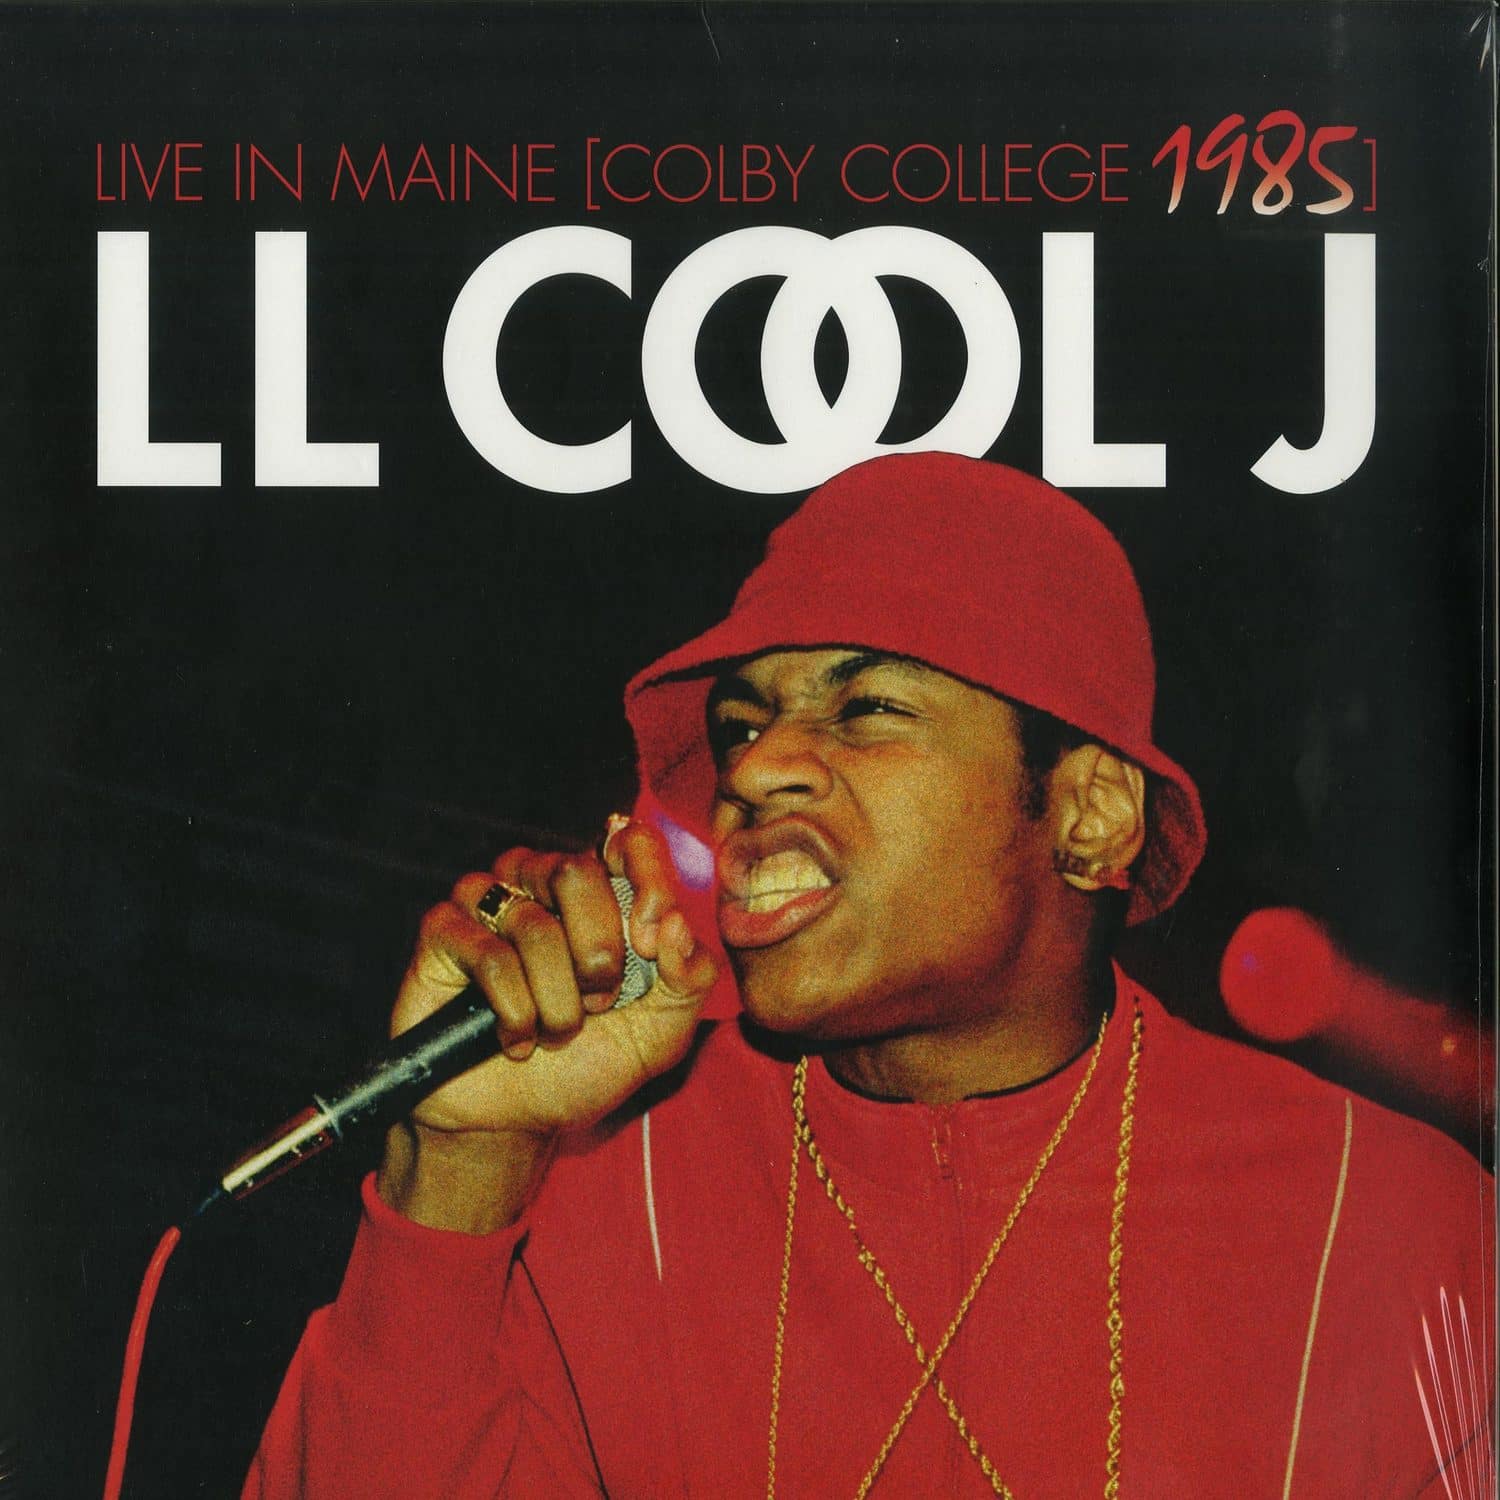 LL Cool J - LIVE IN MAINE - COLBY COLLEGE 1985 